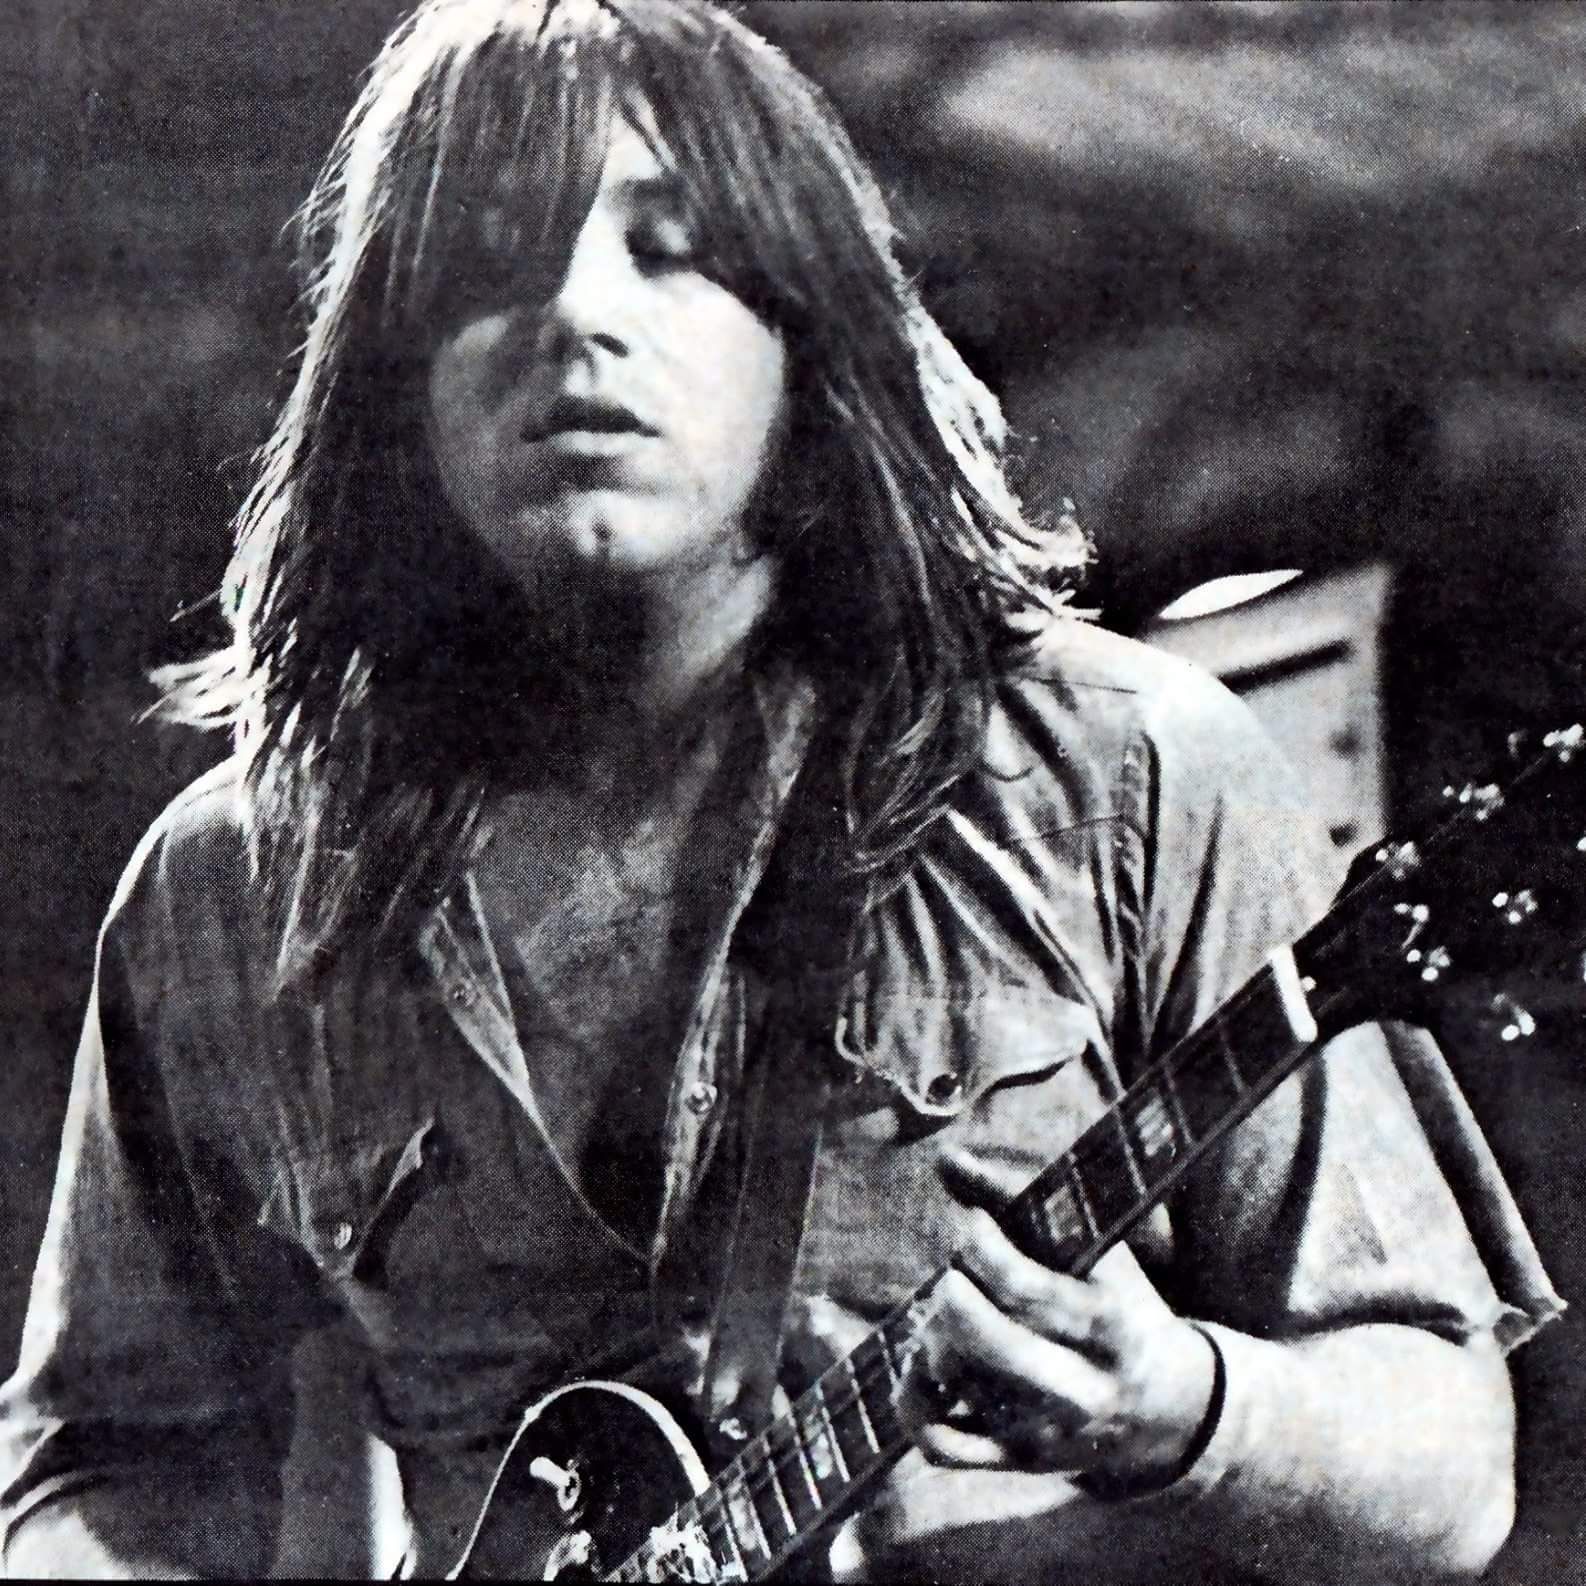 Terry Kath Live 1970 - Isle of Wight